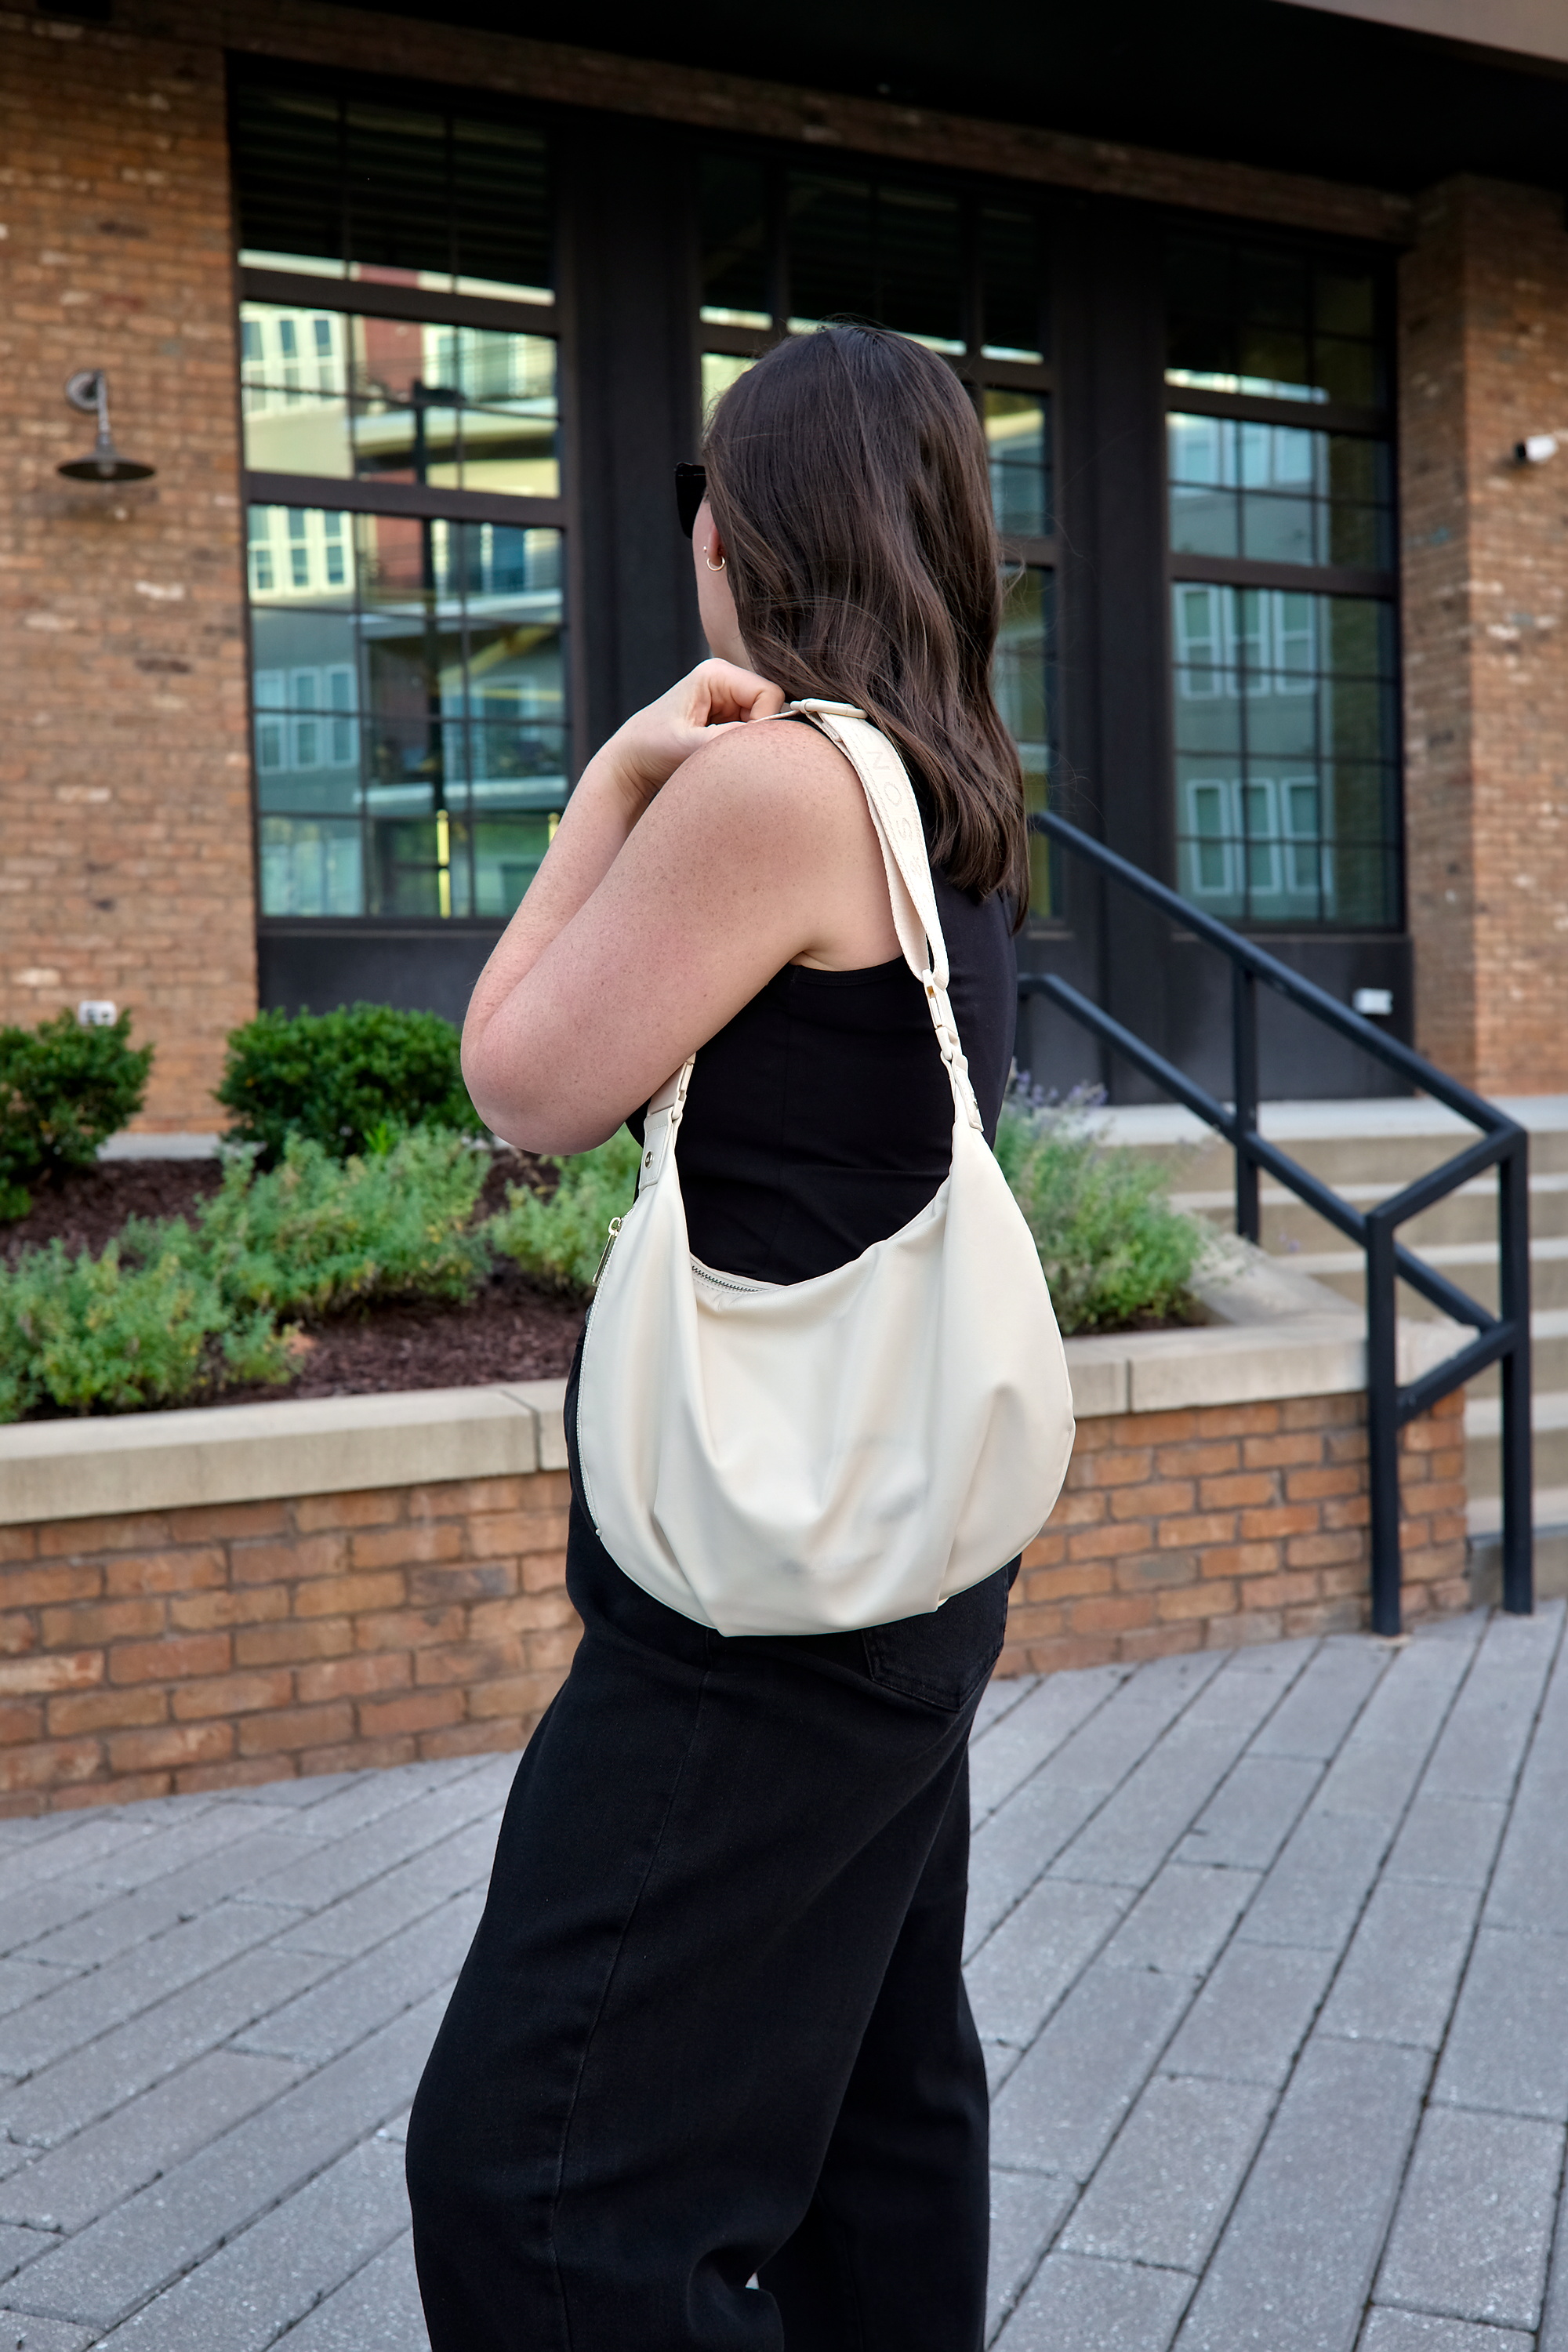 Alyssa wears all black and carries the Aoyama Bag from Lo & Sons